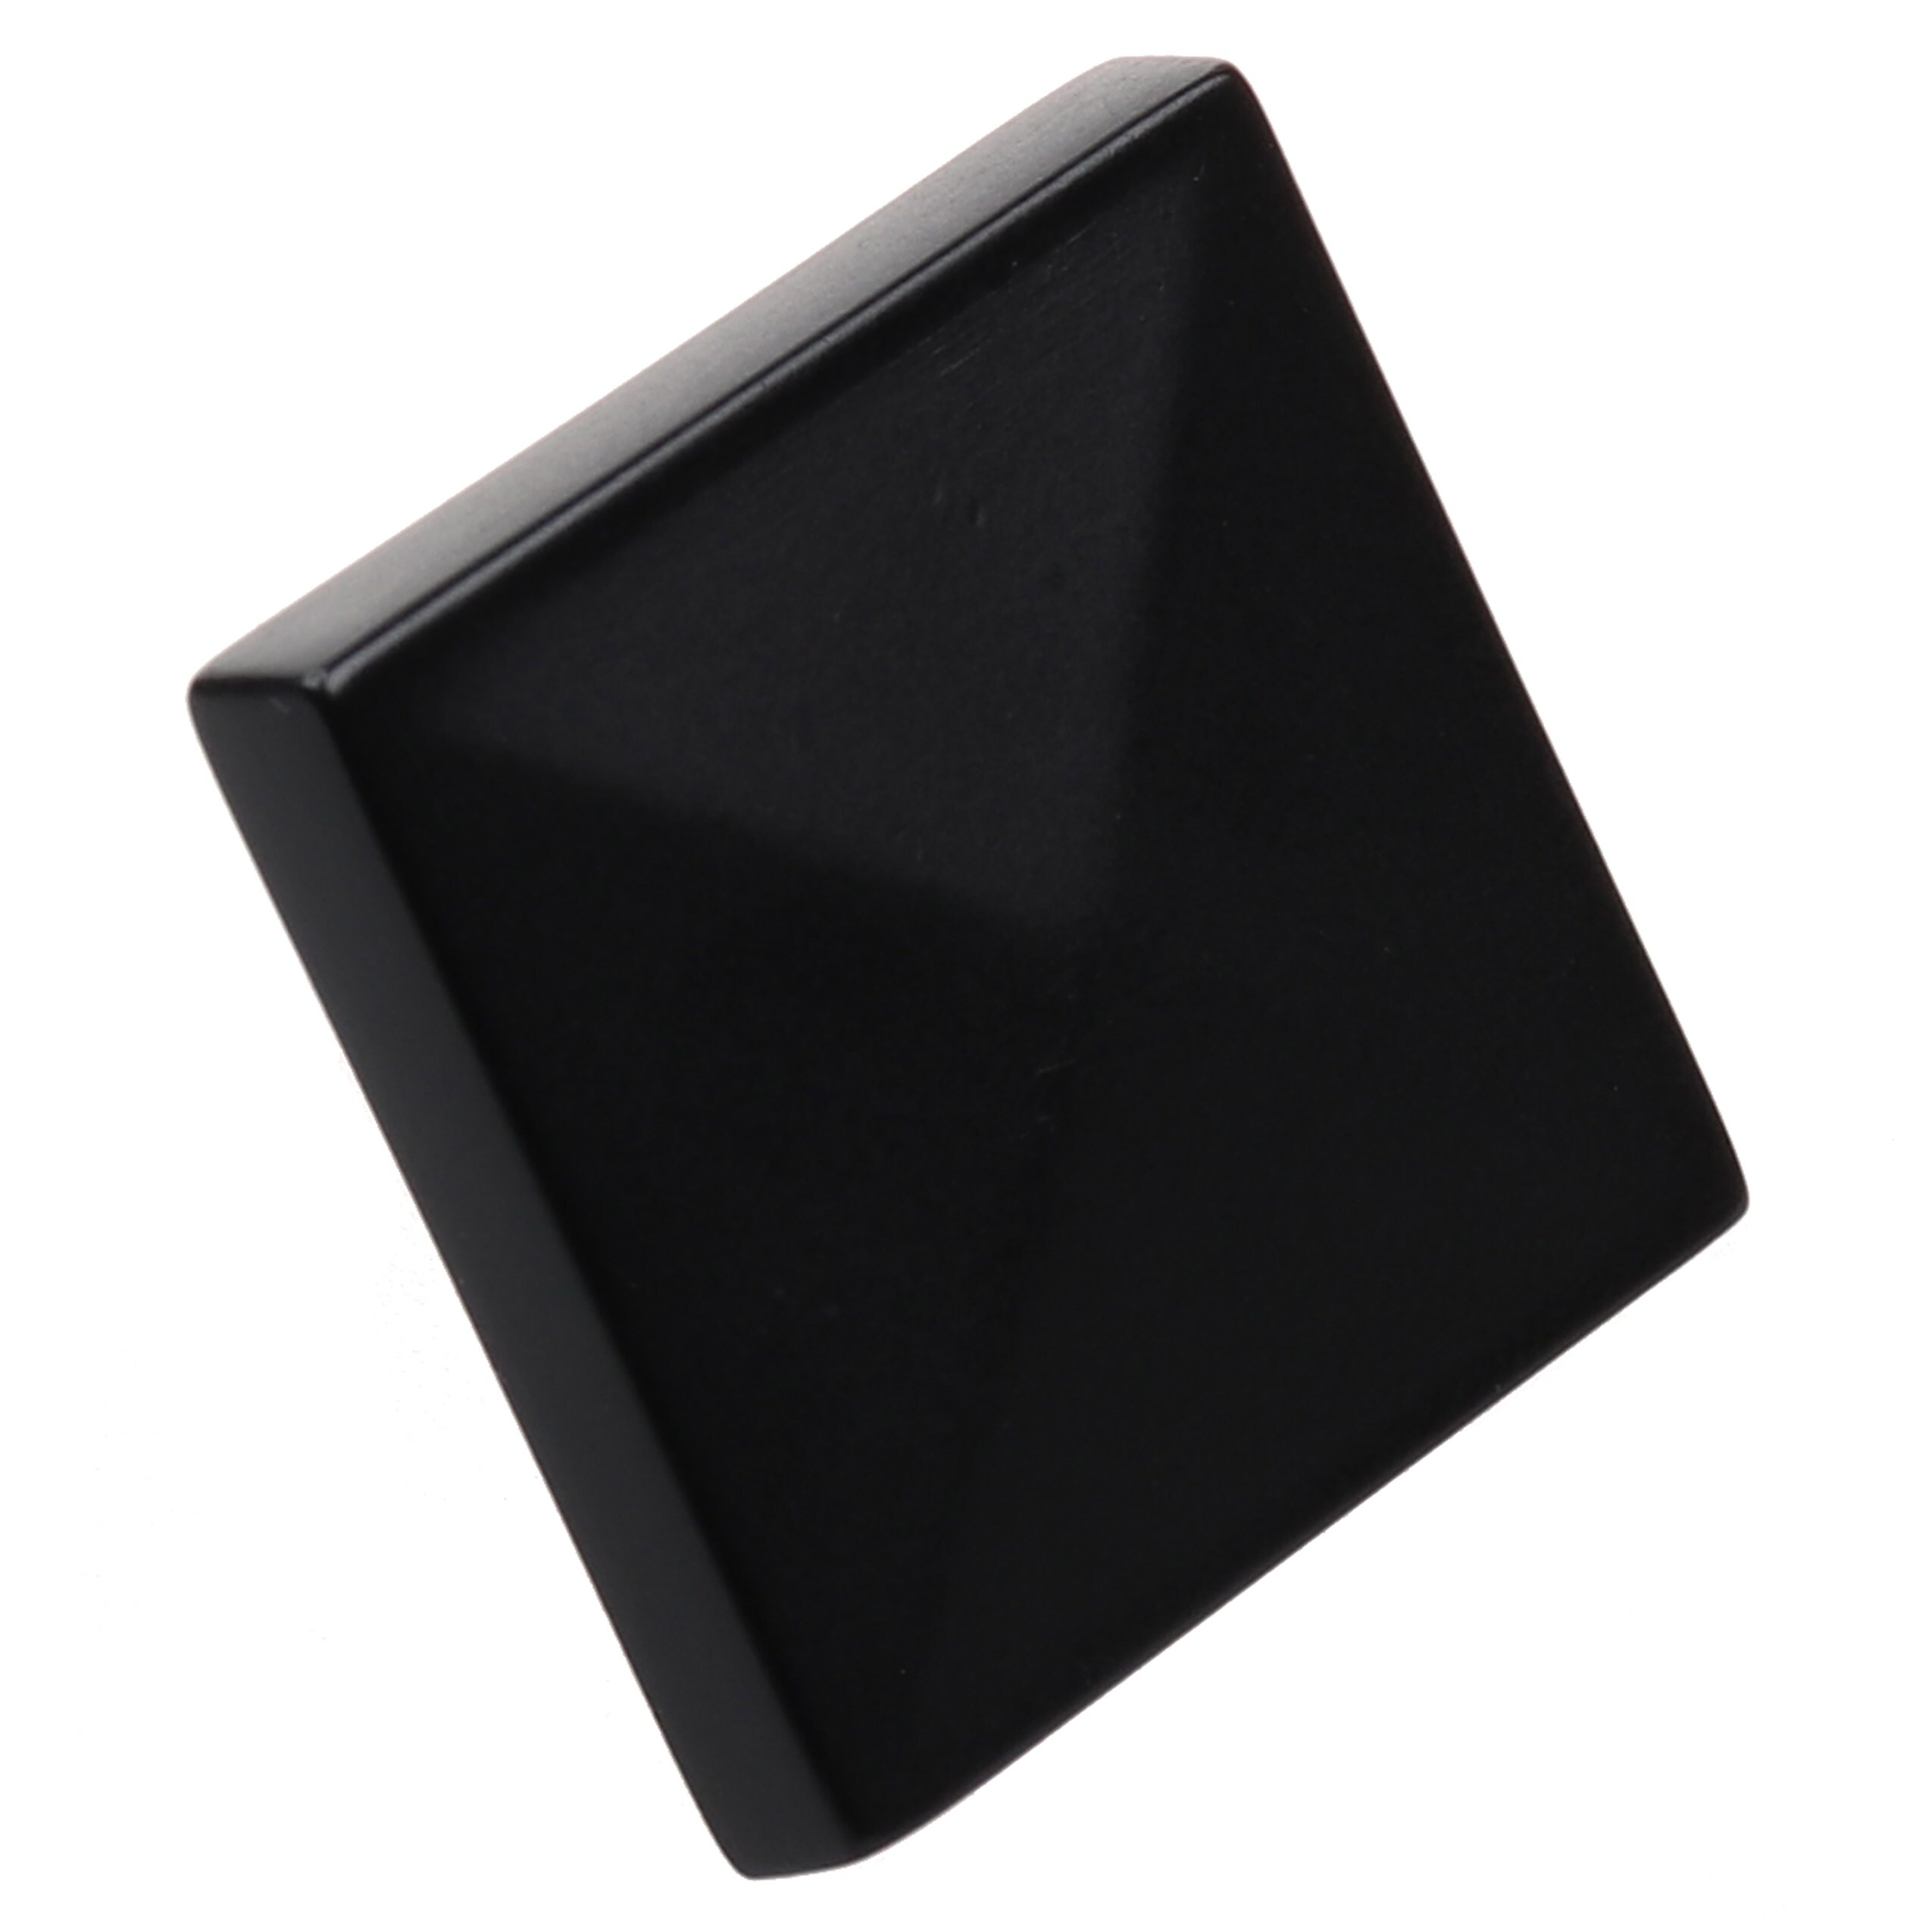 GlideRite 1-1/4 in. Classic Square Pyramid Cabinet Knobs, Matte Black, Pack of 5 - image 2 of 4